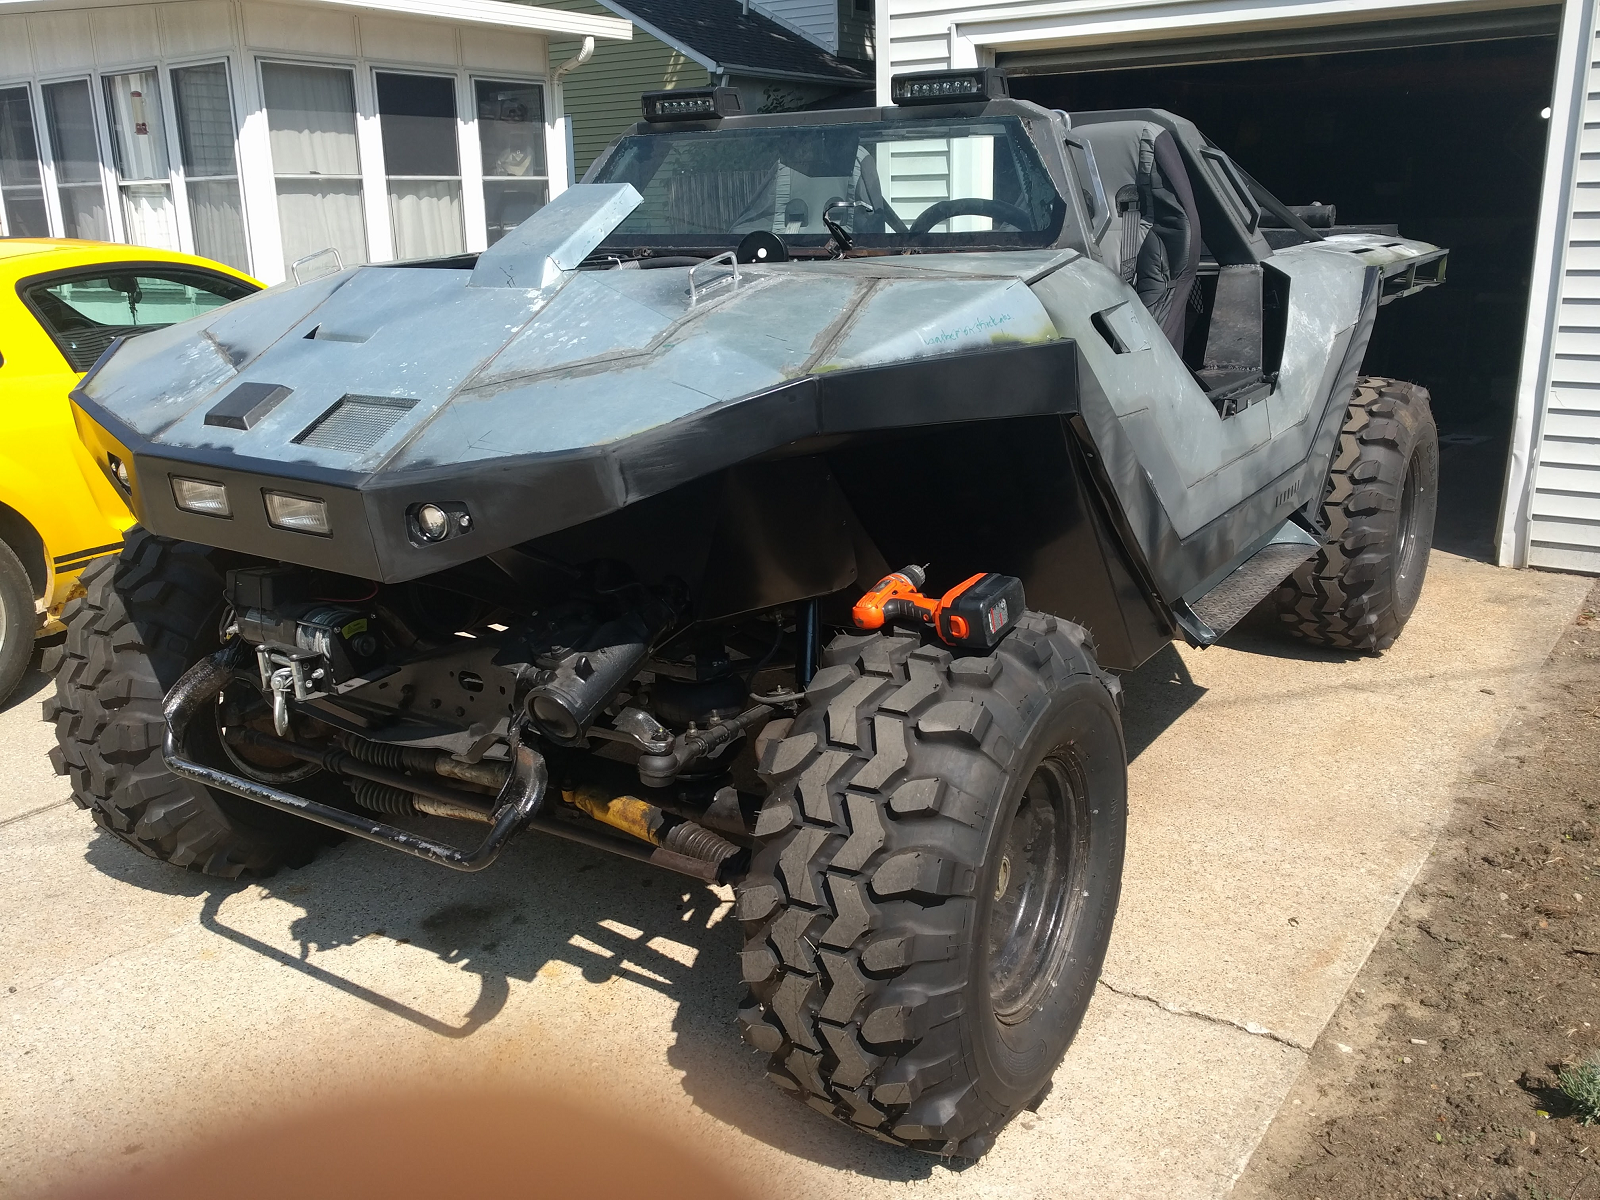 Halo Fan Loves The Warthog So Much He Built His Own